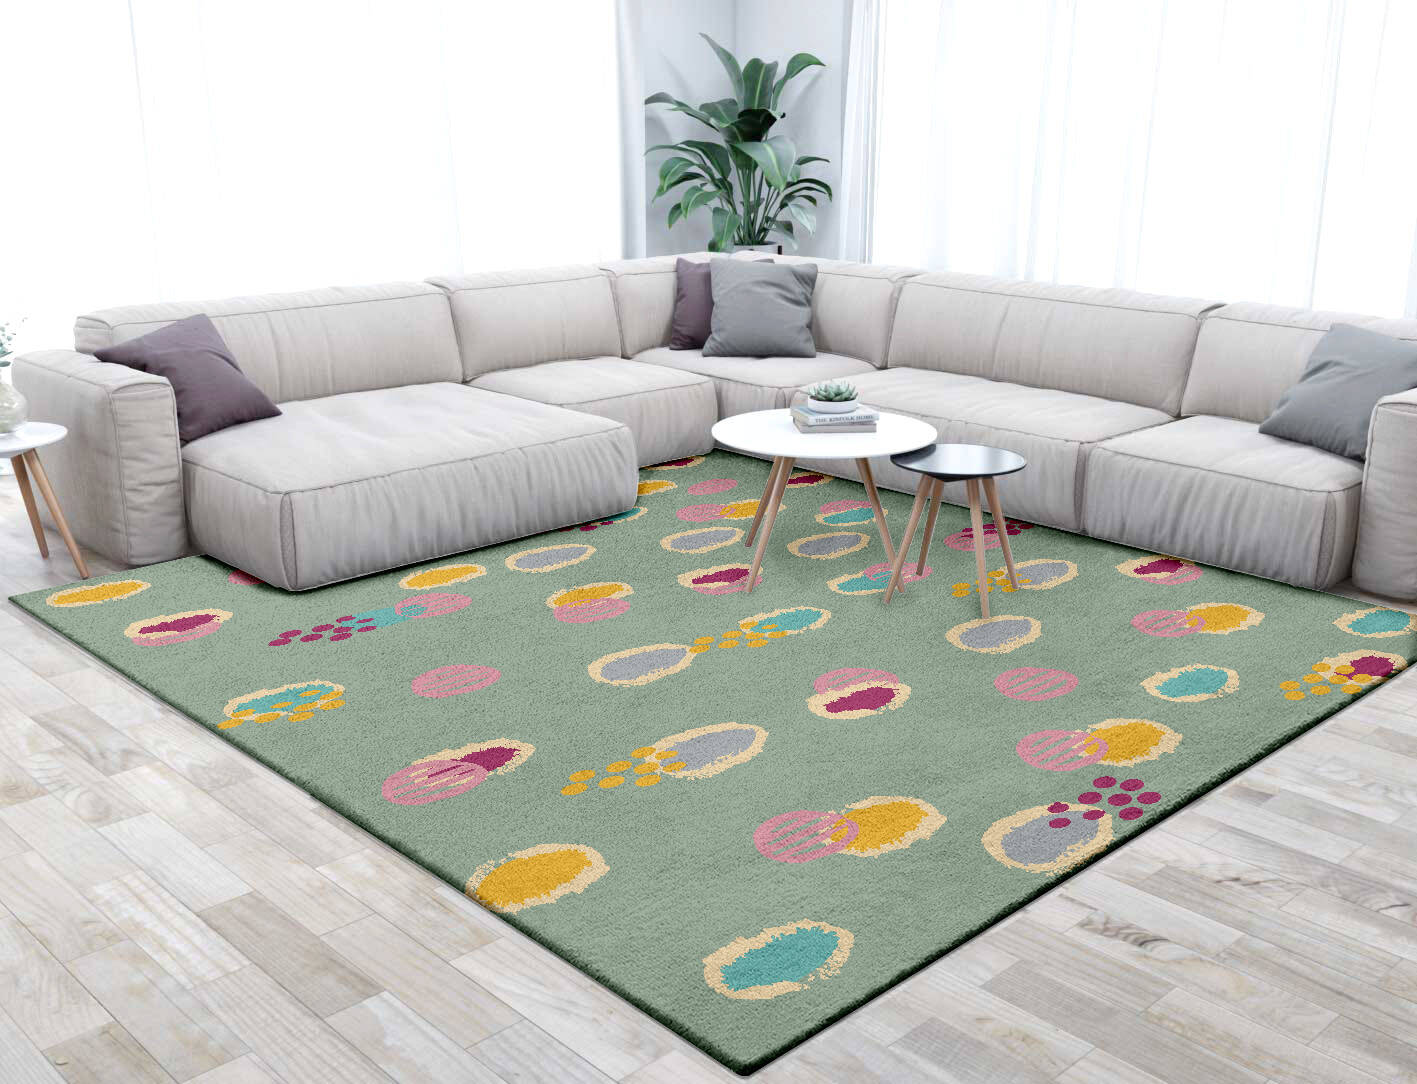 Colour Prints Kids Square Hand Tufted Pure Wool Custom Rug by Rug Artisan